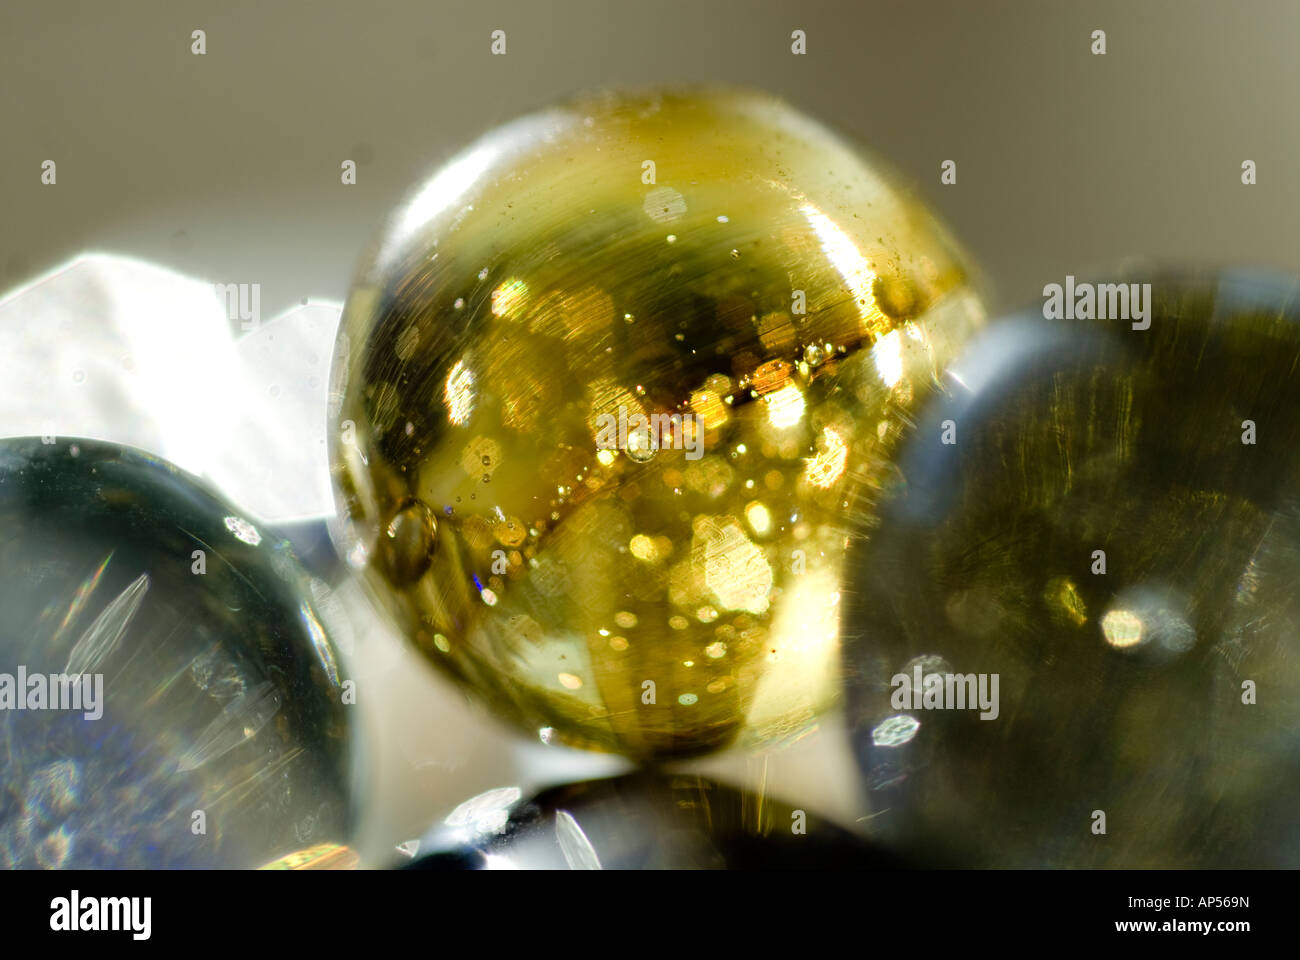 Closeup of spherical glass marbles with glowing reflections. Stock Photo